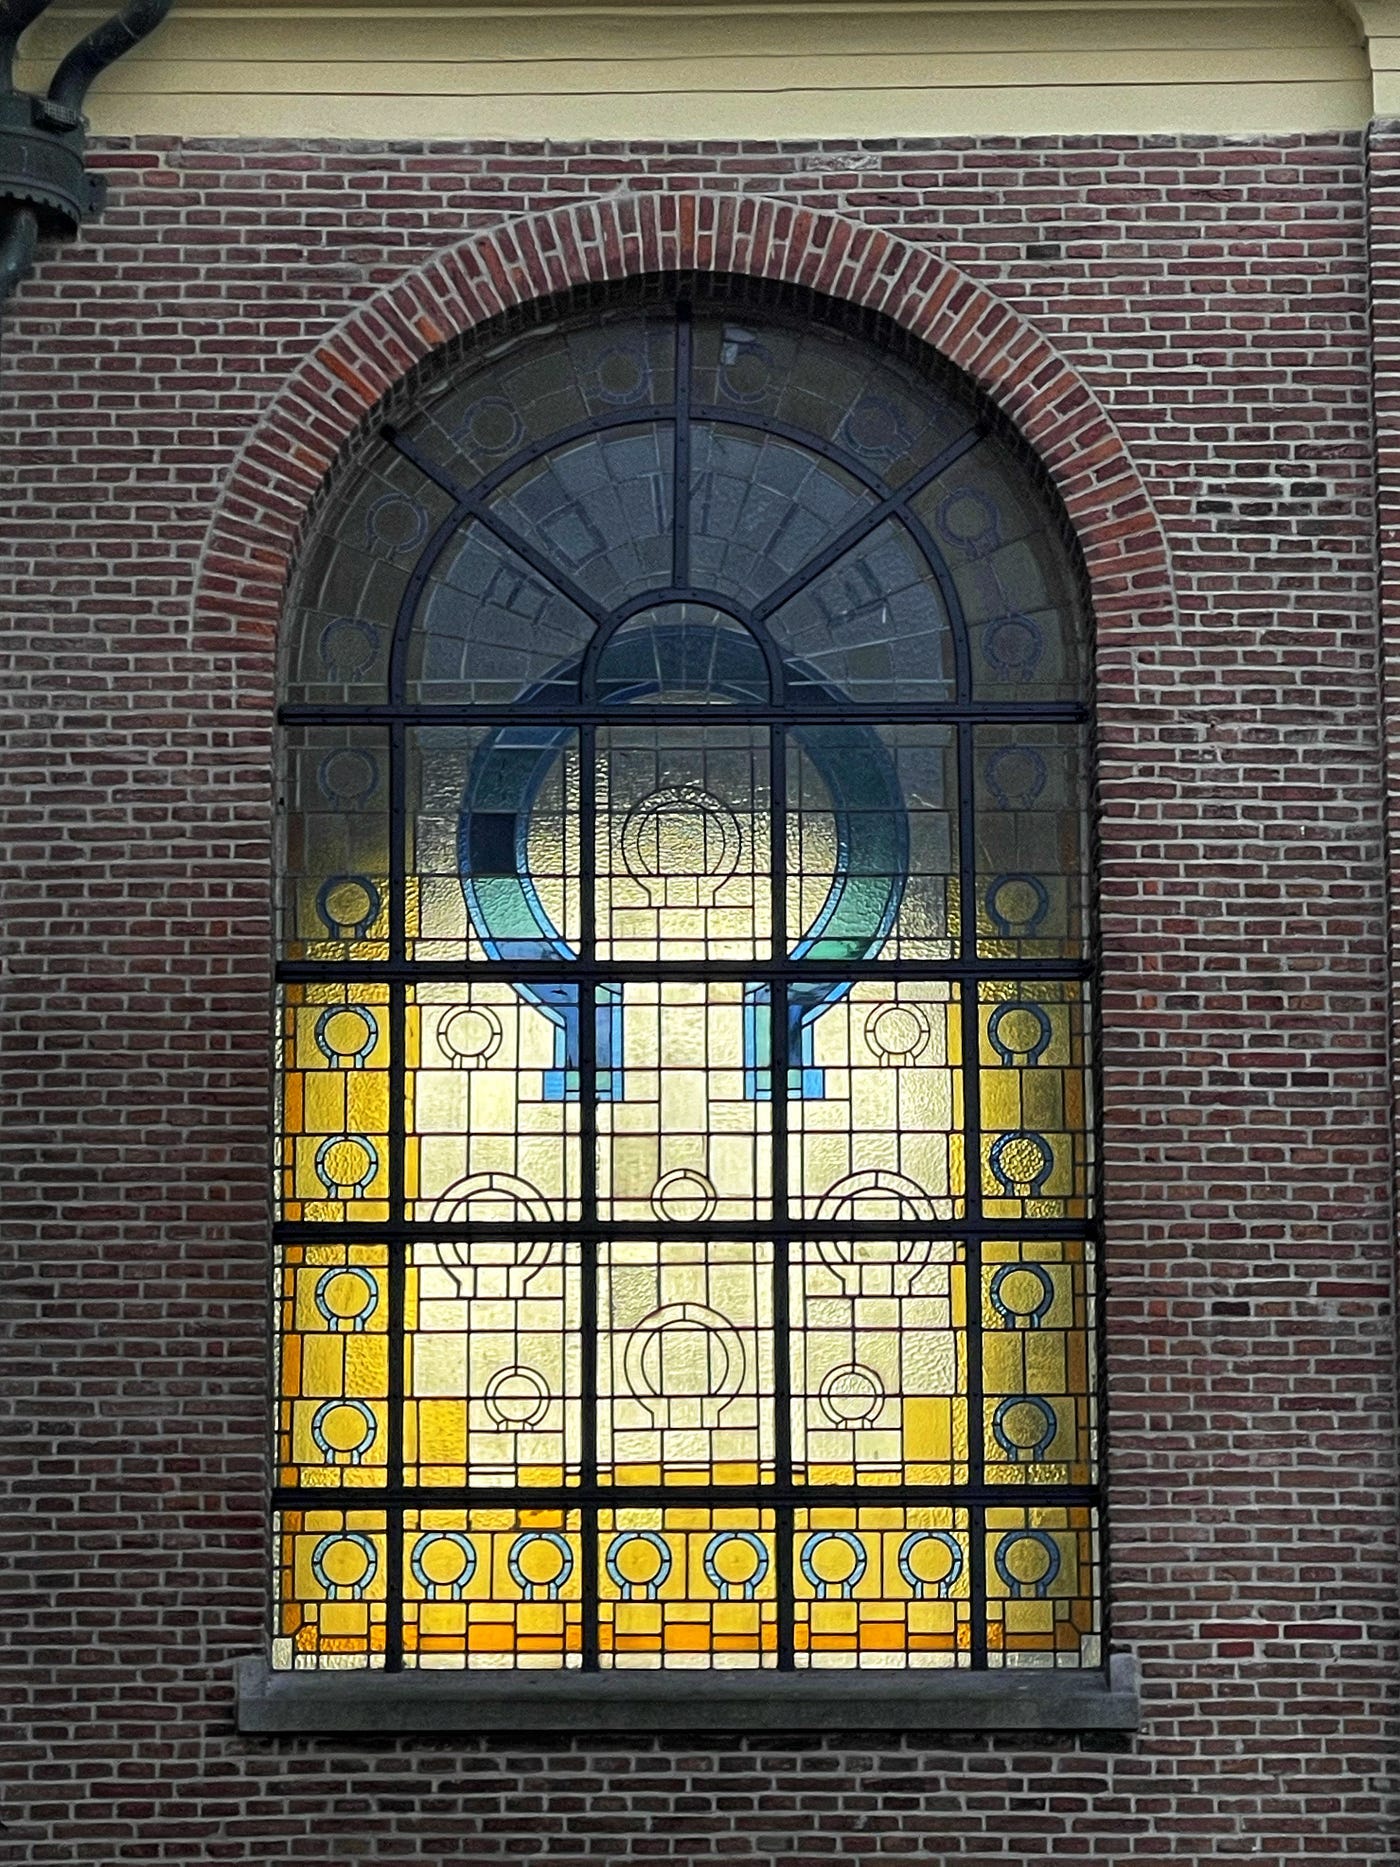 A stained glass church window in bright blue and yellow colors. Unlike the French cathedral type, this one has Art Deco elements. It’s a 1924 design, being replicated in the 1990s.